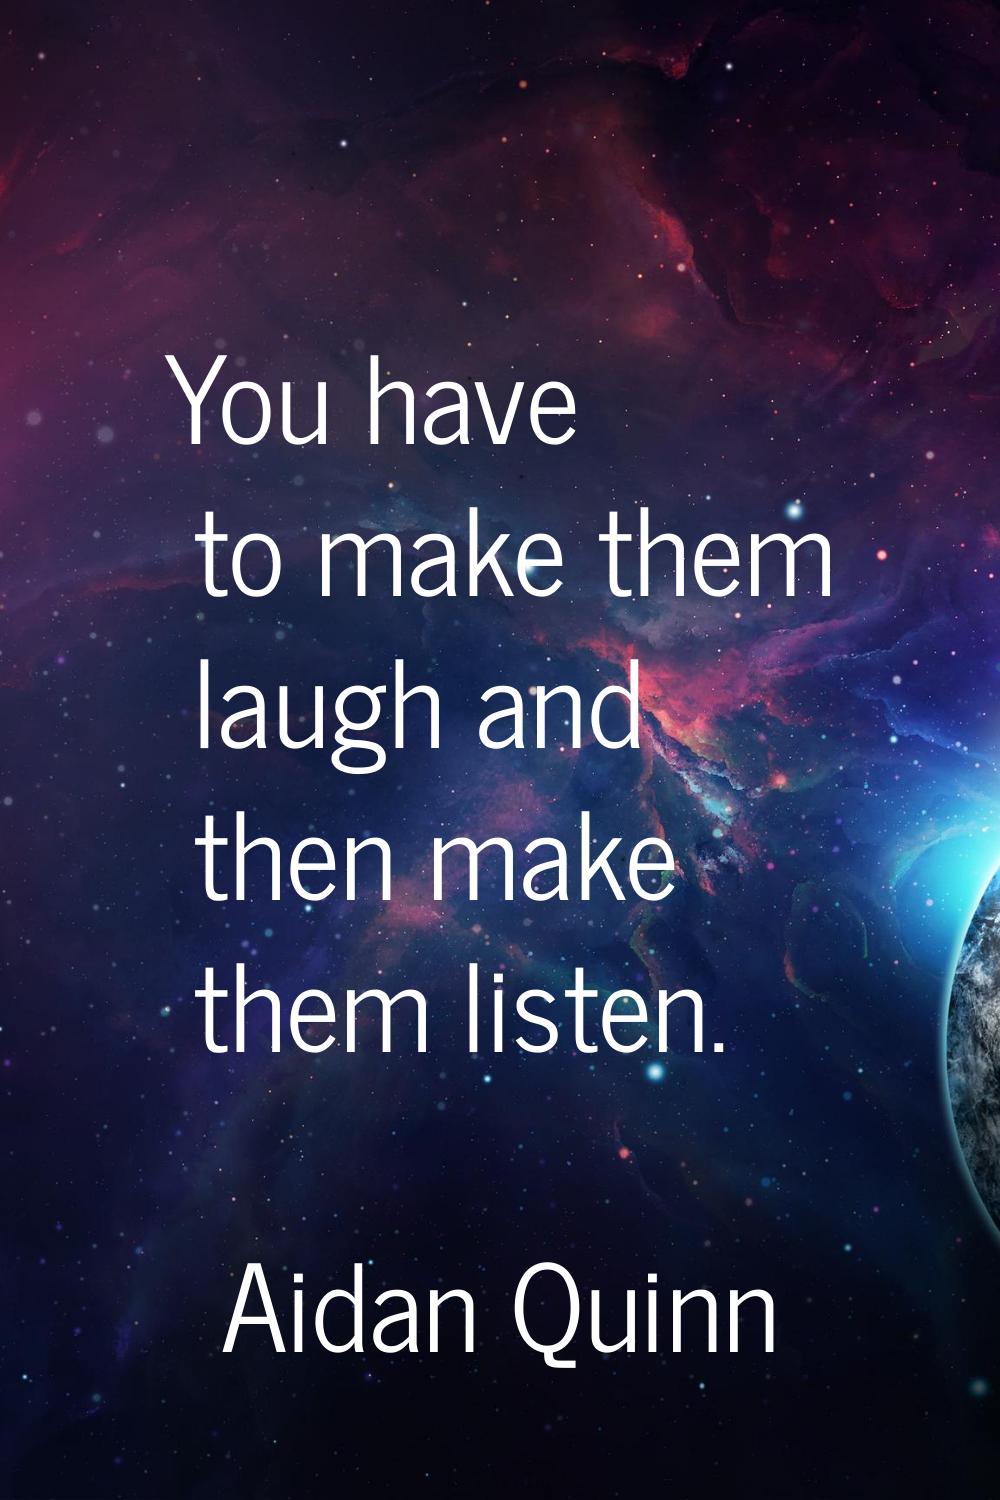 You have to make them laugh and then make them listen.